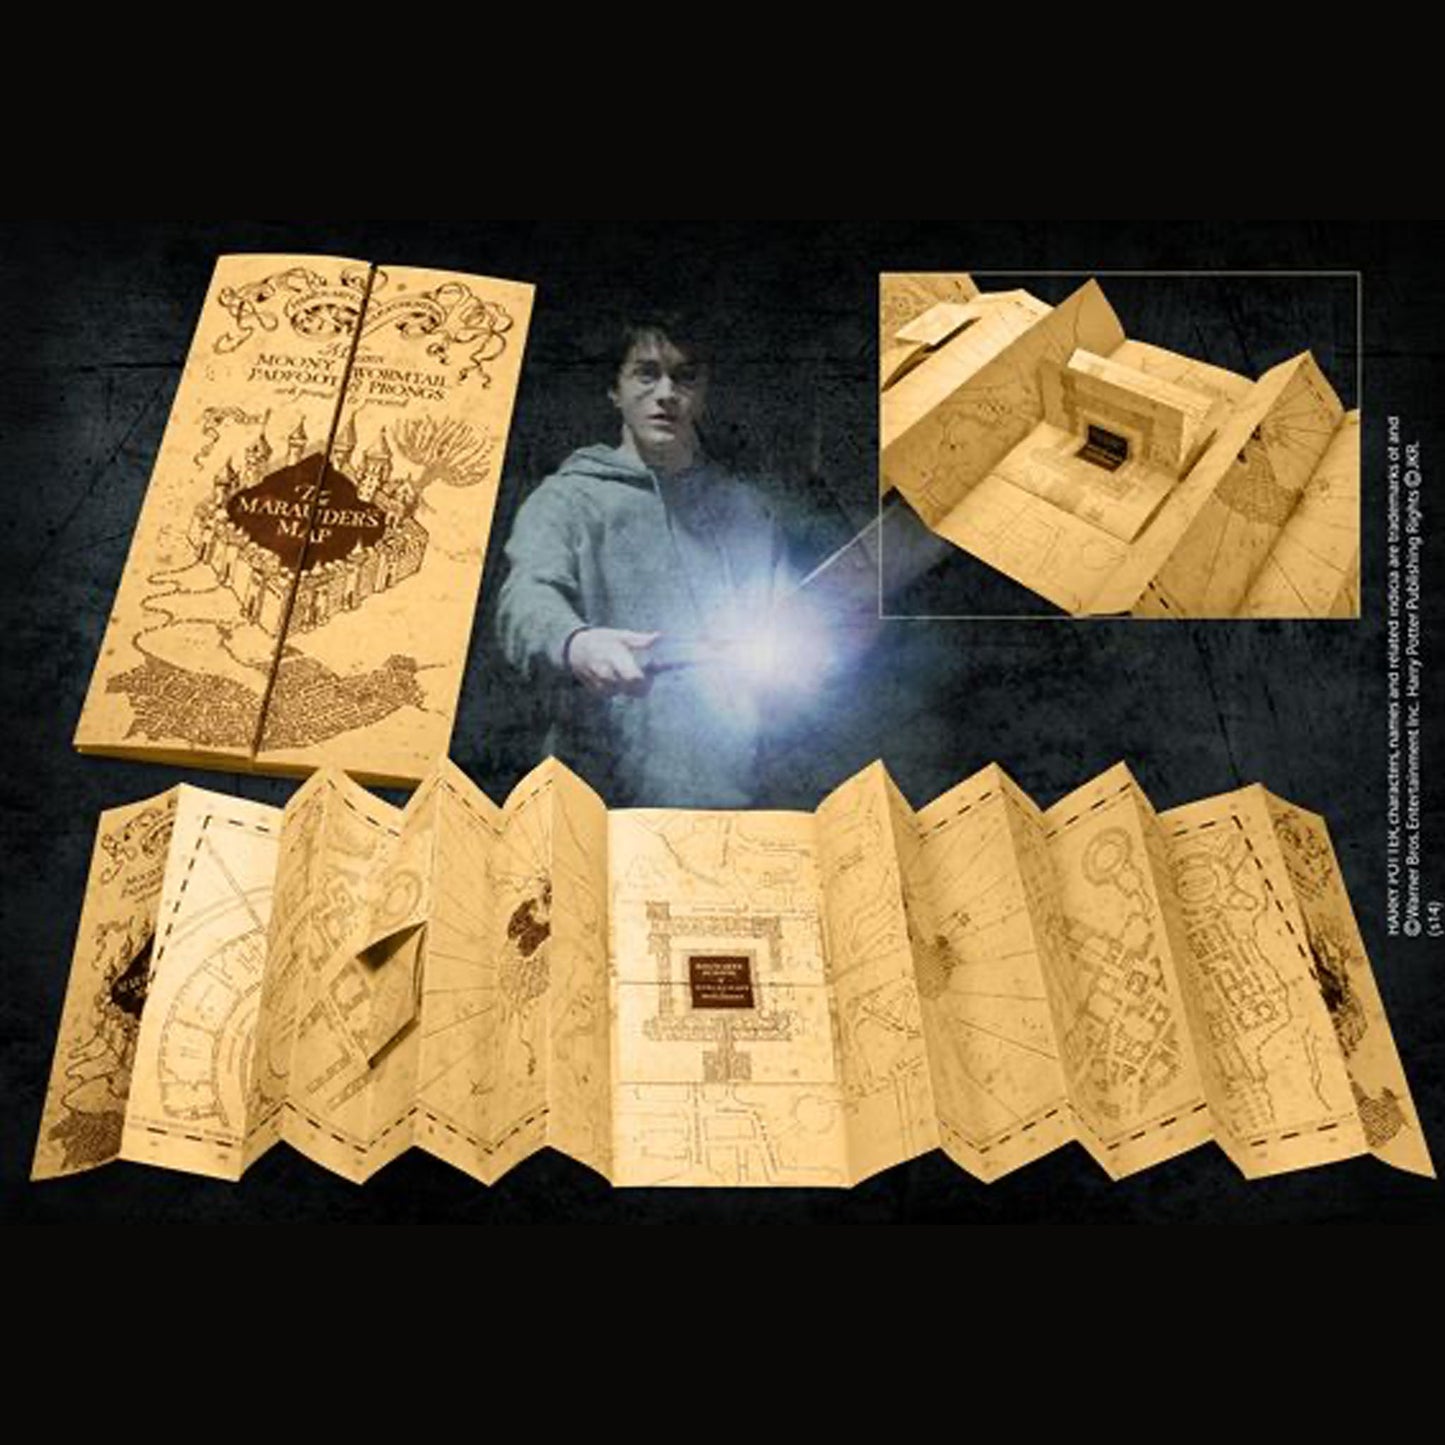 The Marauder's Map (Harry Potter) The Noble Collection Prop Replica